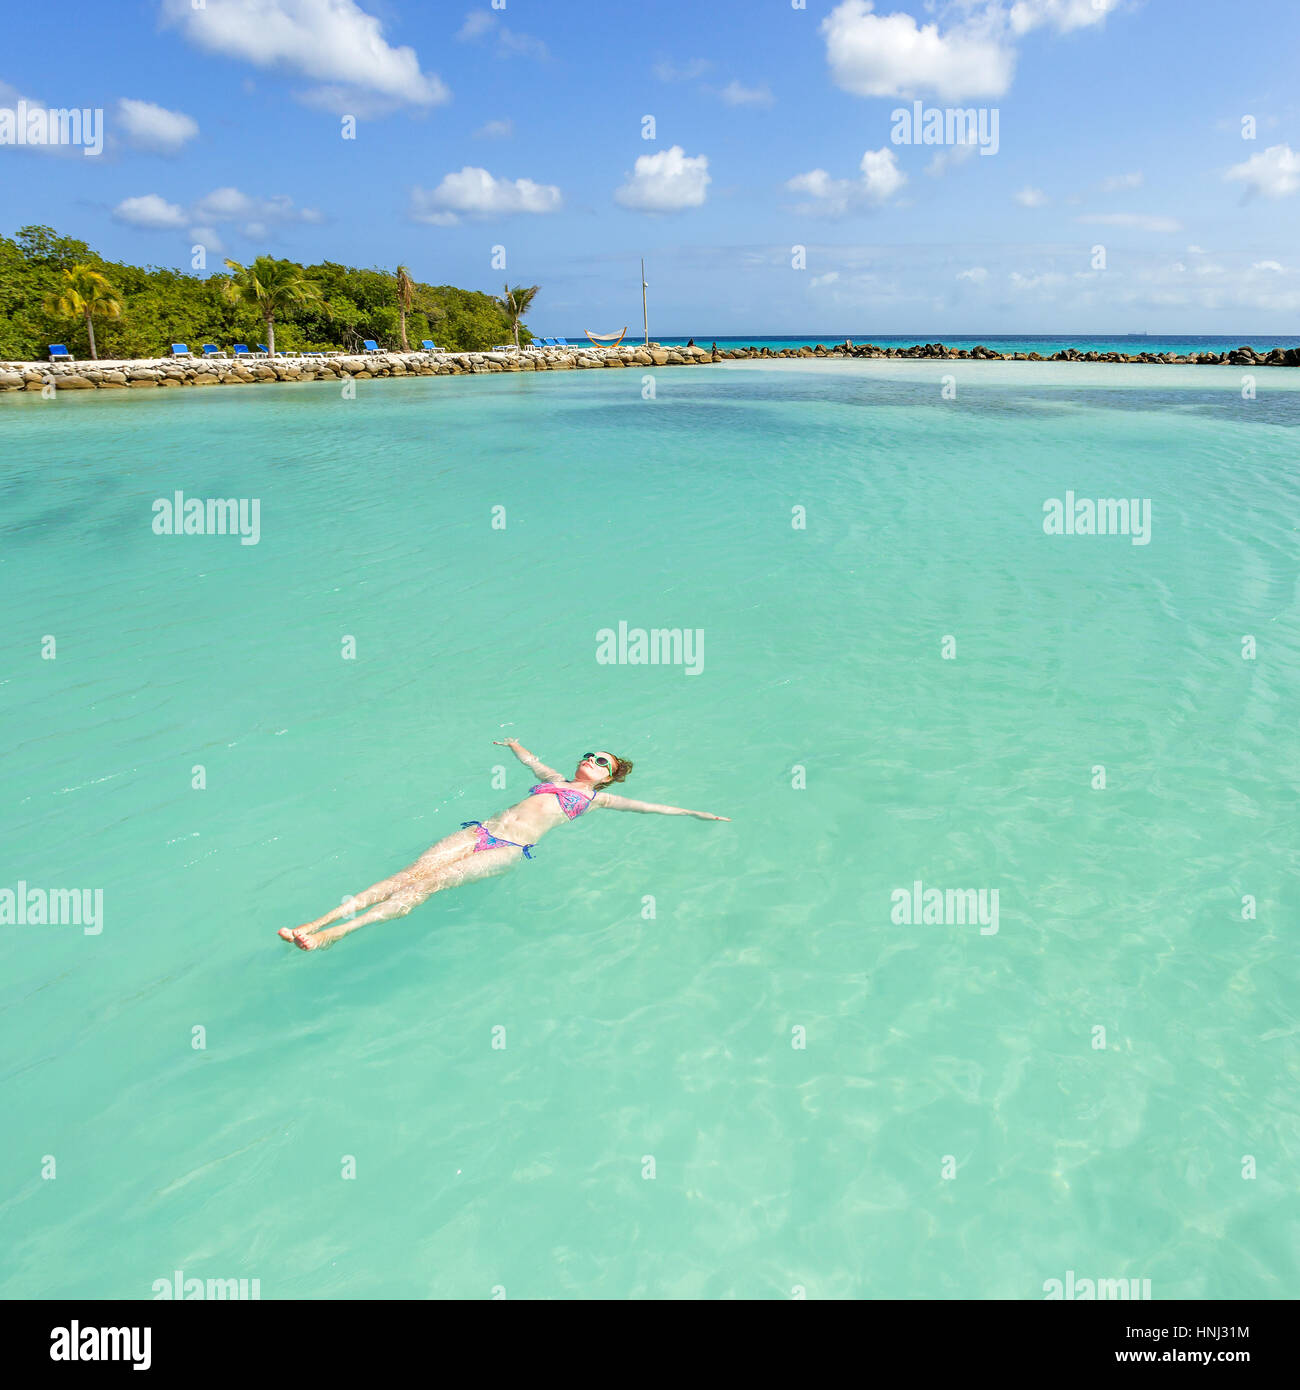 Woman floating and relaxing in turquoise waters at colorful tropical beach Stock Photo